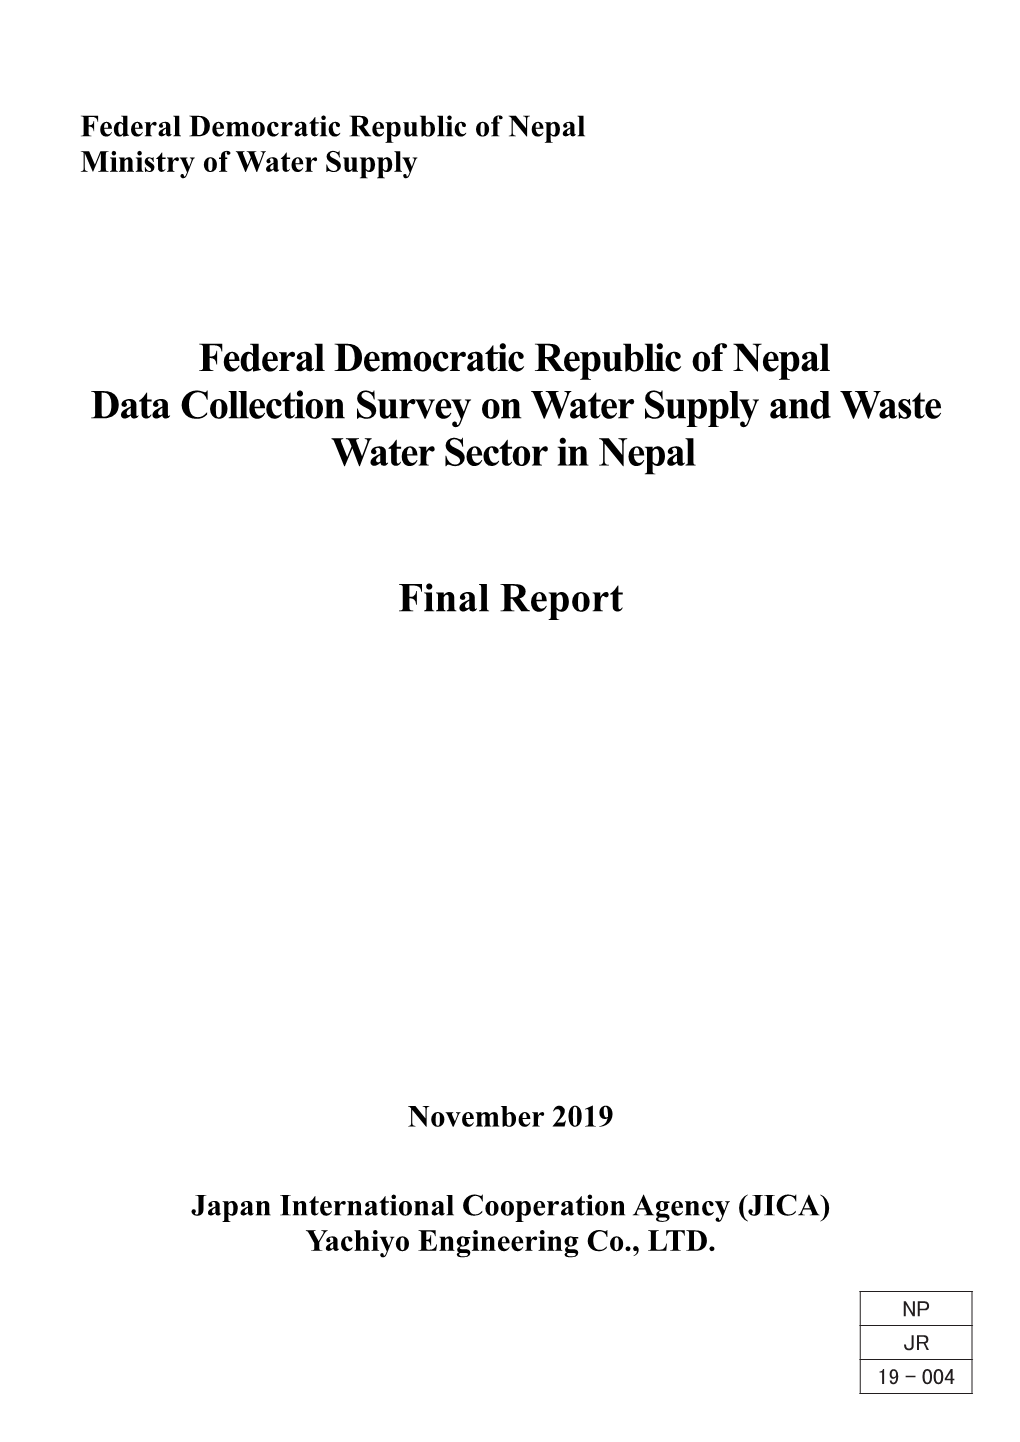 Federal Democratic Republic of Nepal Data Collection Survey on Water